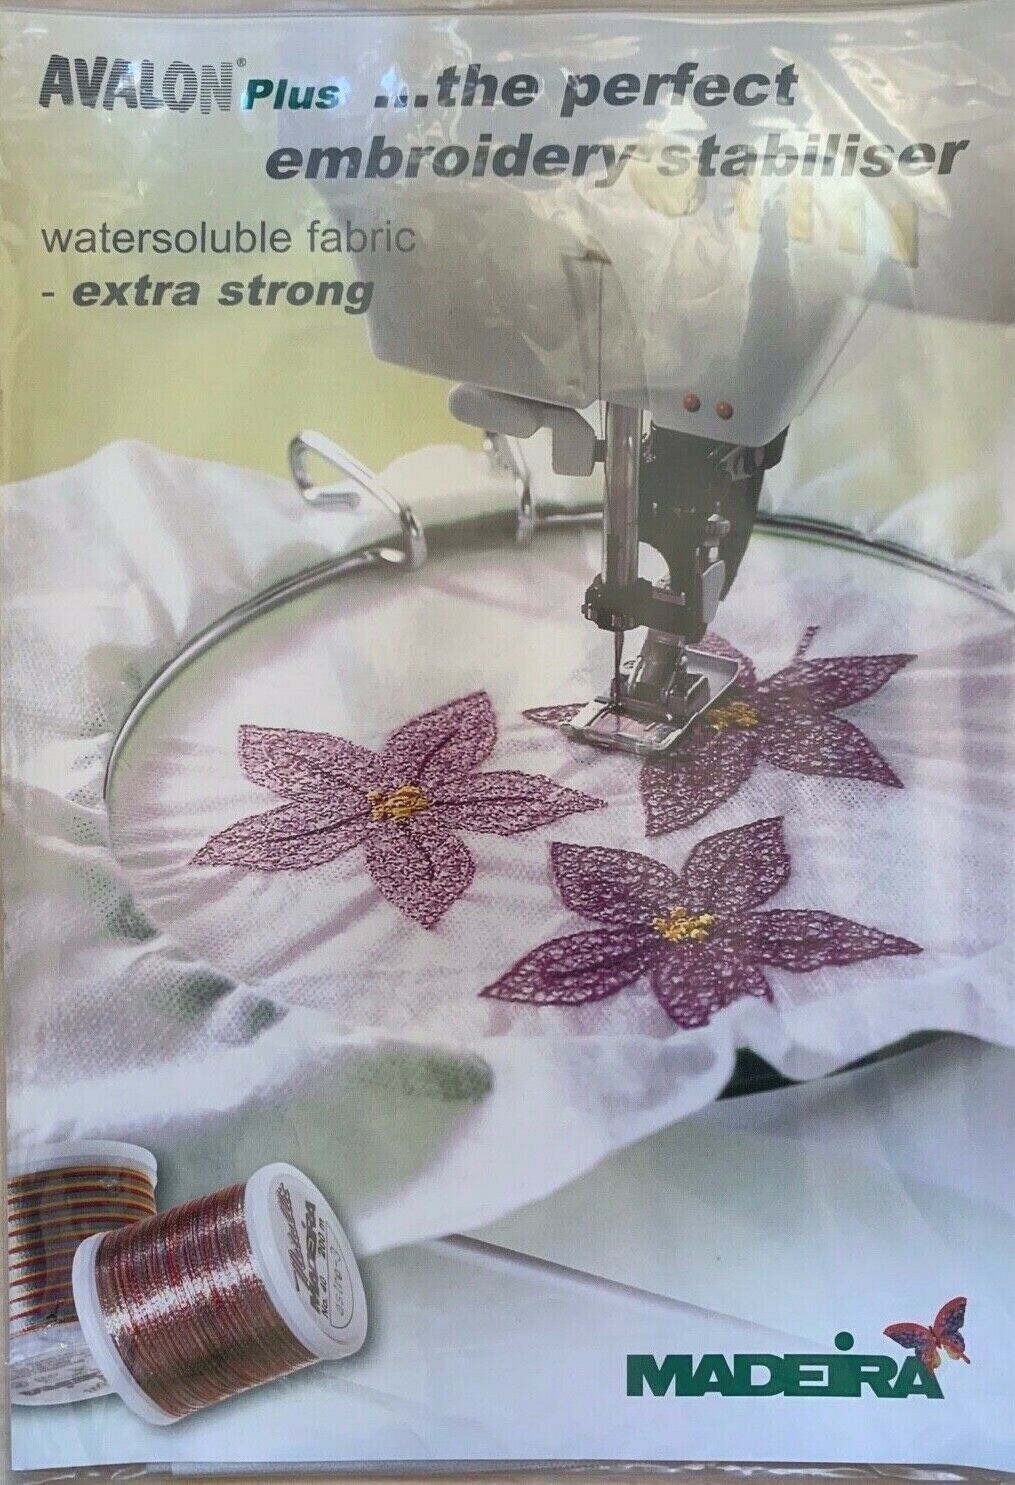 Avalon plus embroidery Stablizer Watersoluble fabric extra strong